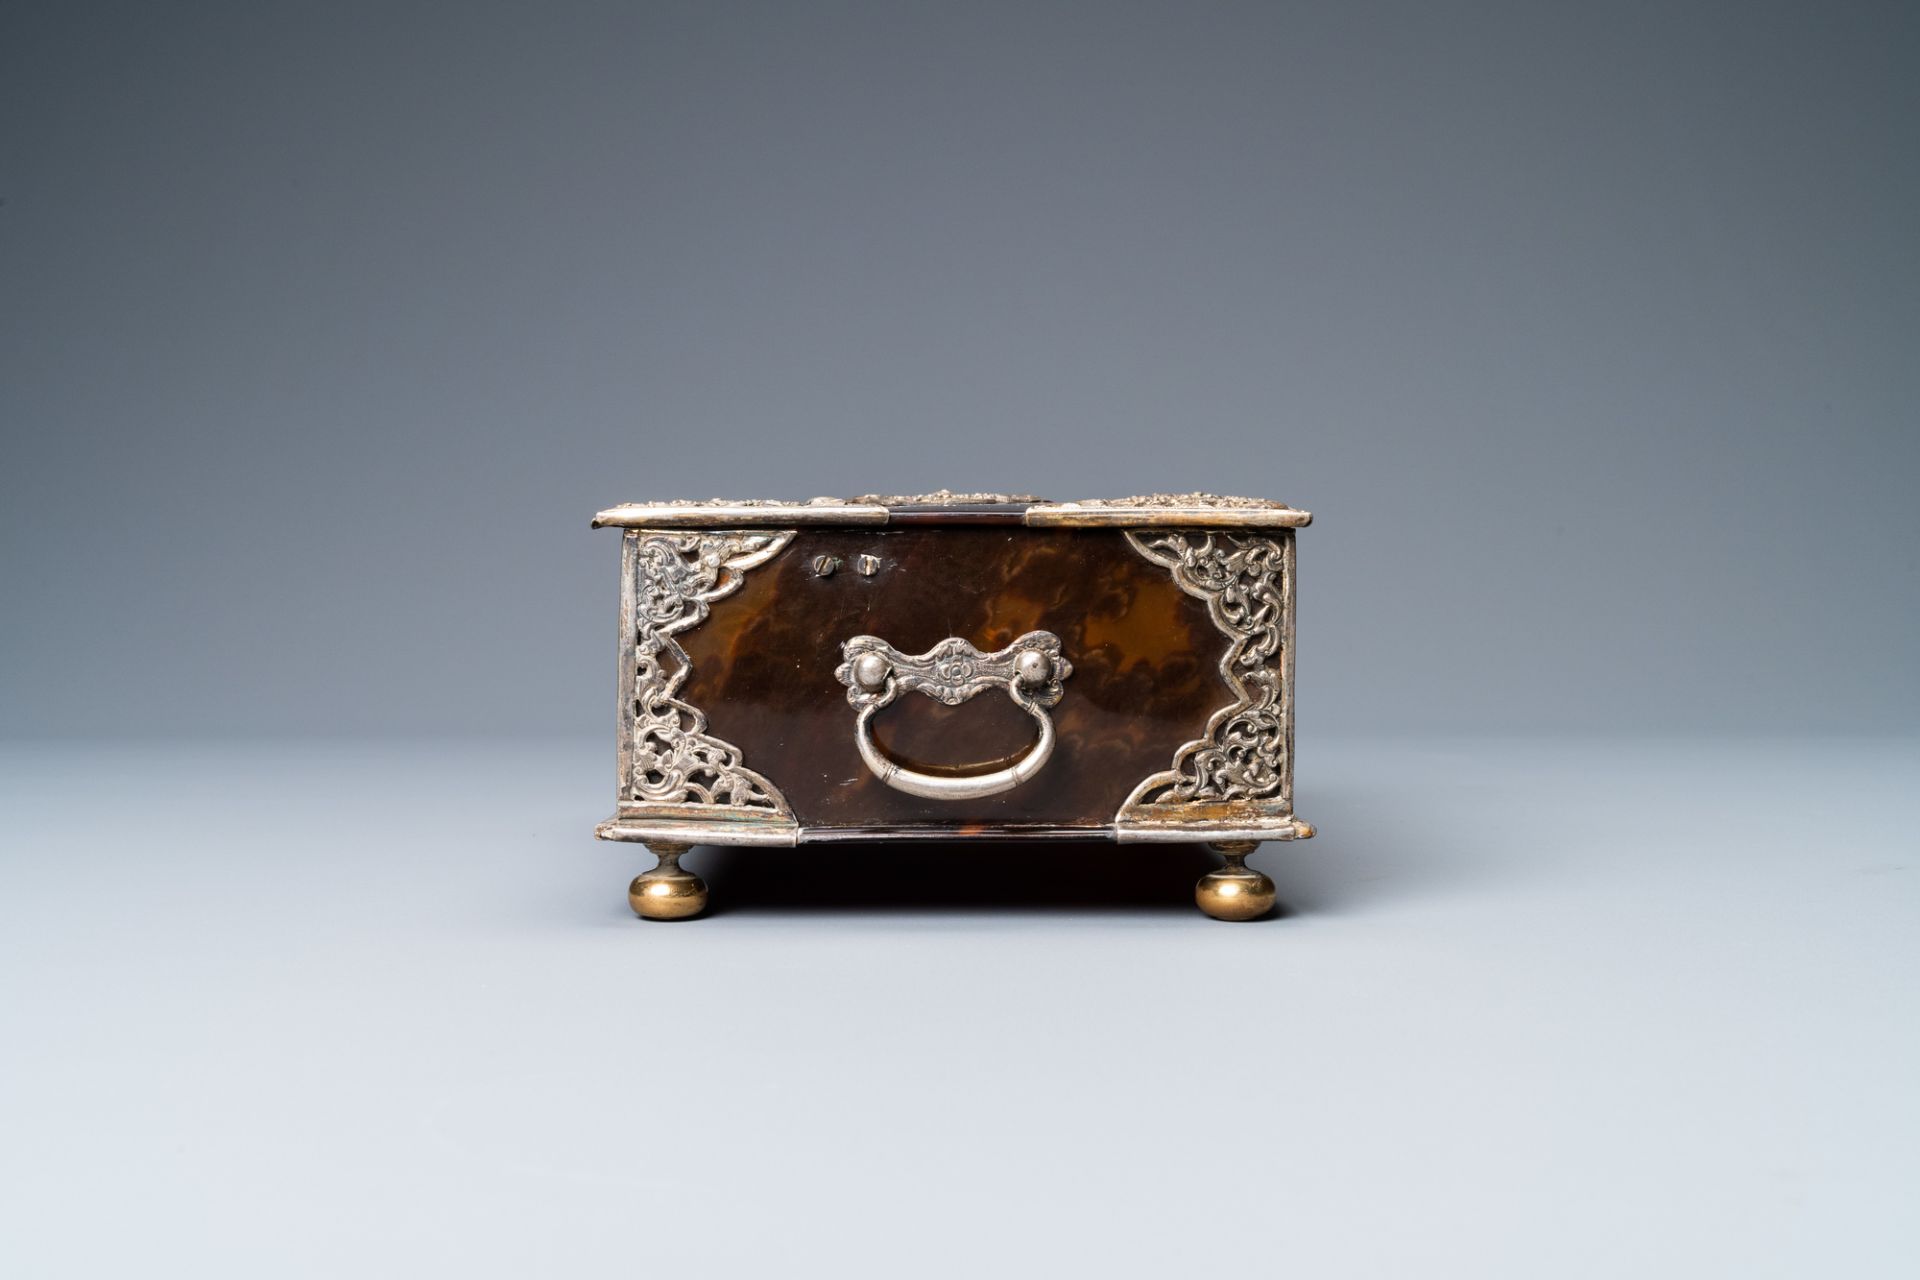 A Dutch colonial silver-mounted tortoise shell sirih casket, ca. 1700 - Image 8 of 10